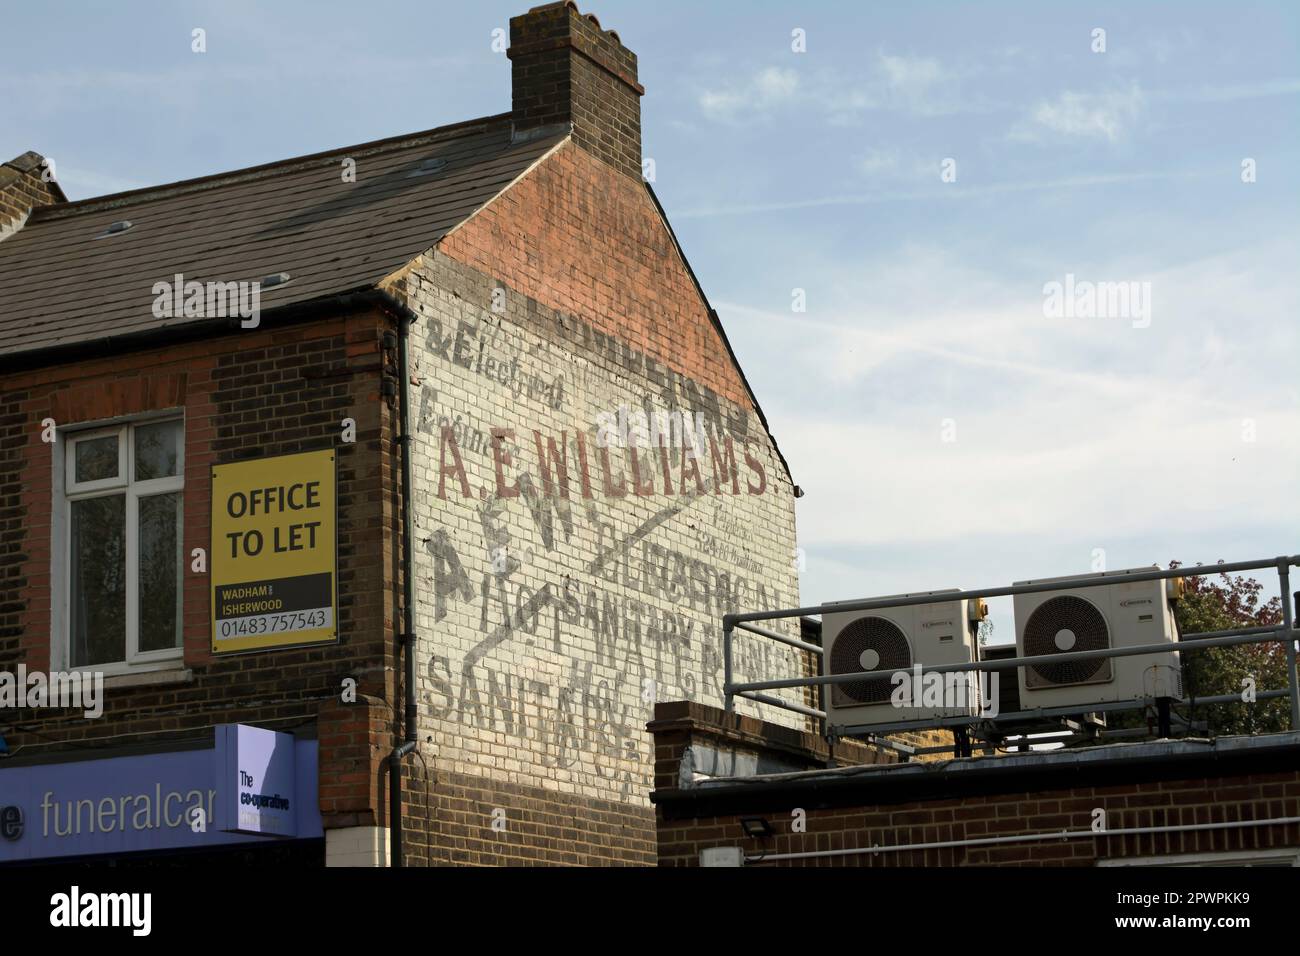 ghost sign sign on a building in raynes park, southwest london, england, advertising a.e. williams, electrical, hot water and sanitation engineer Stock Photo